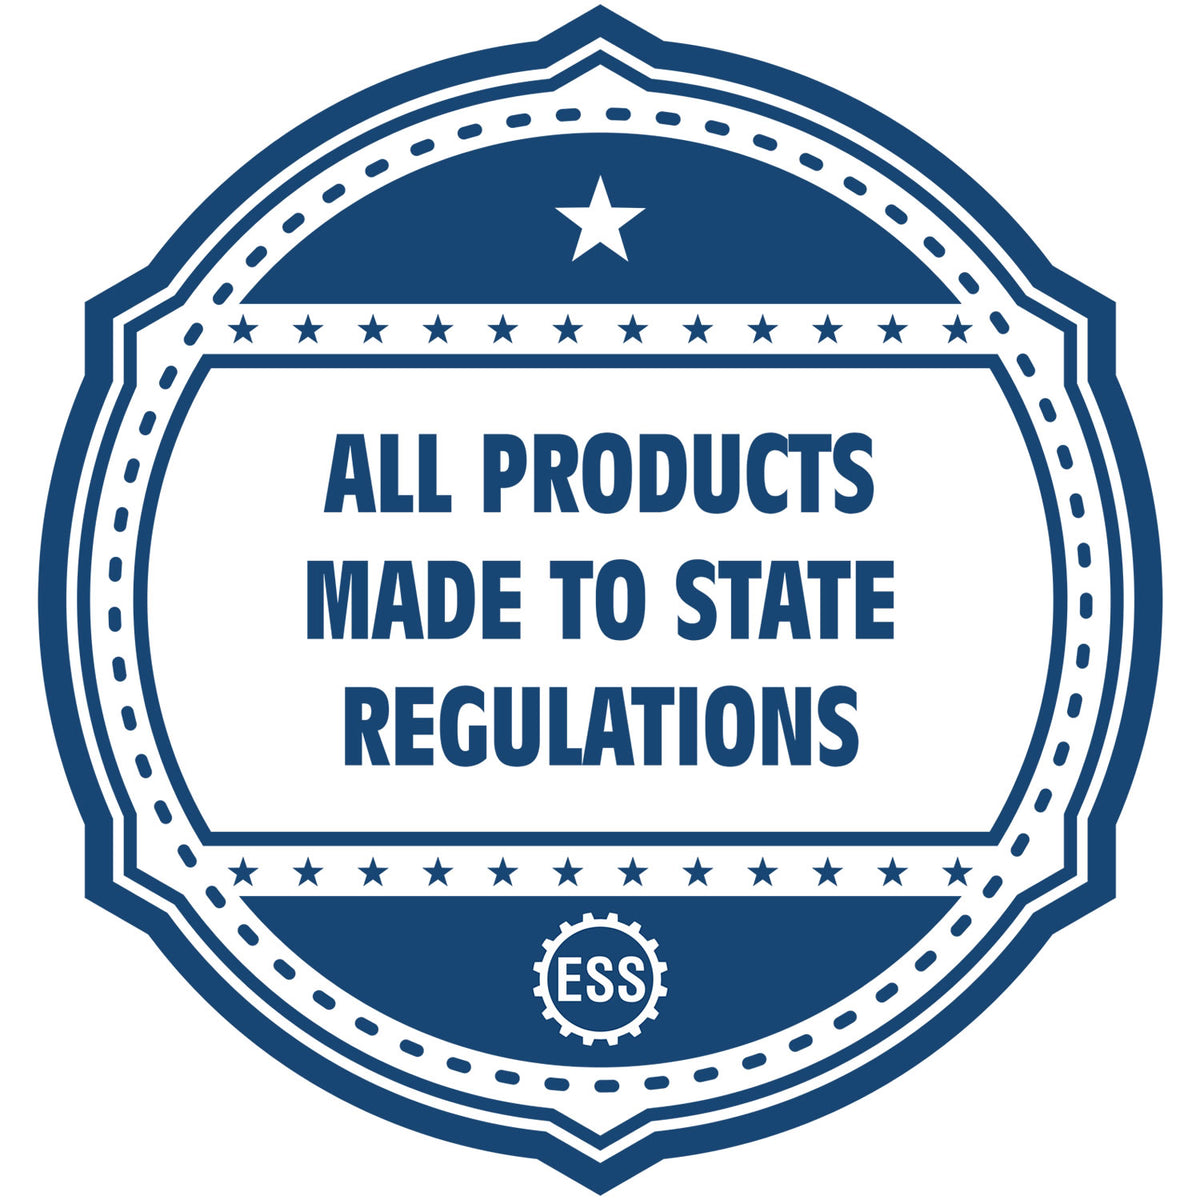 An icon or badge element for the MaxLight Premium Pre-Inked New Hampshire State Seal Notarial Stamp showing that this product is made in compliance with state regulations.